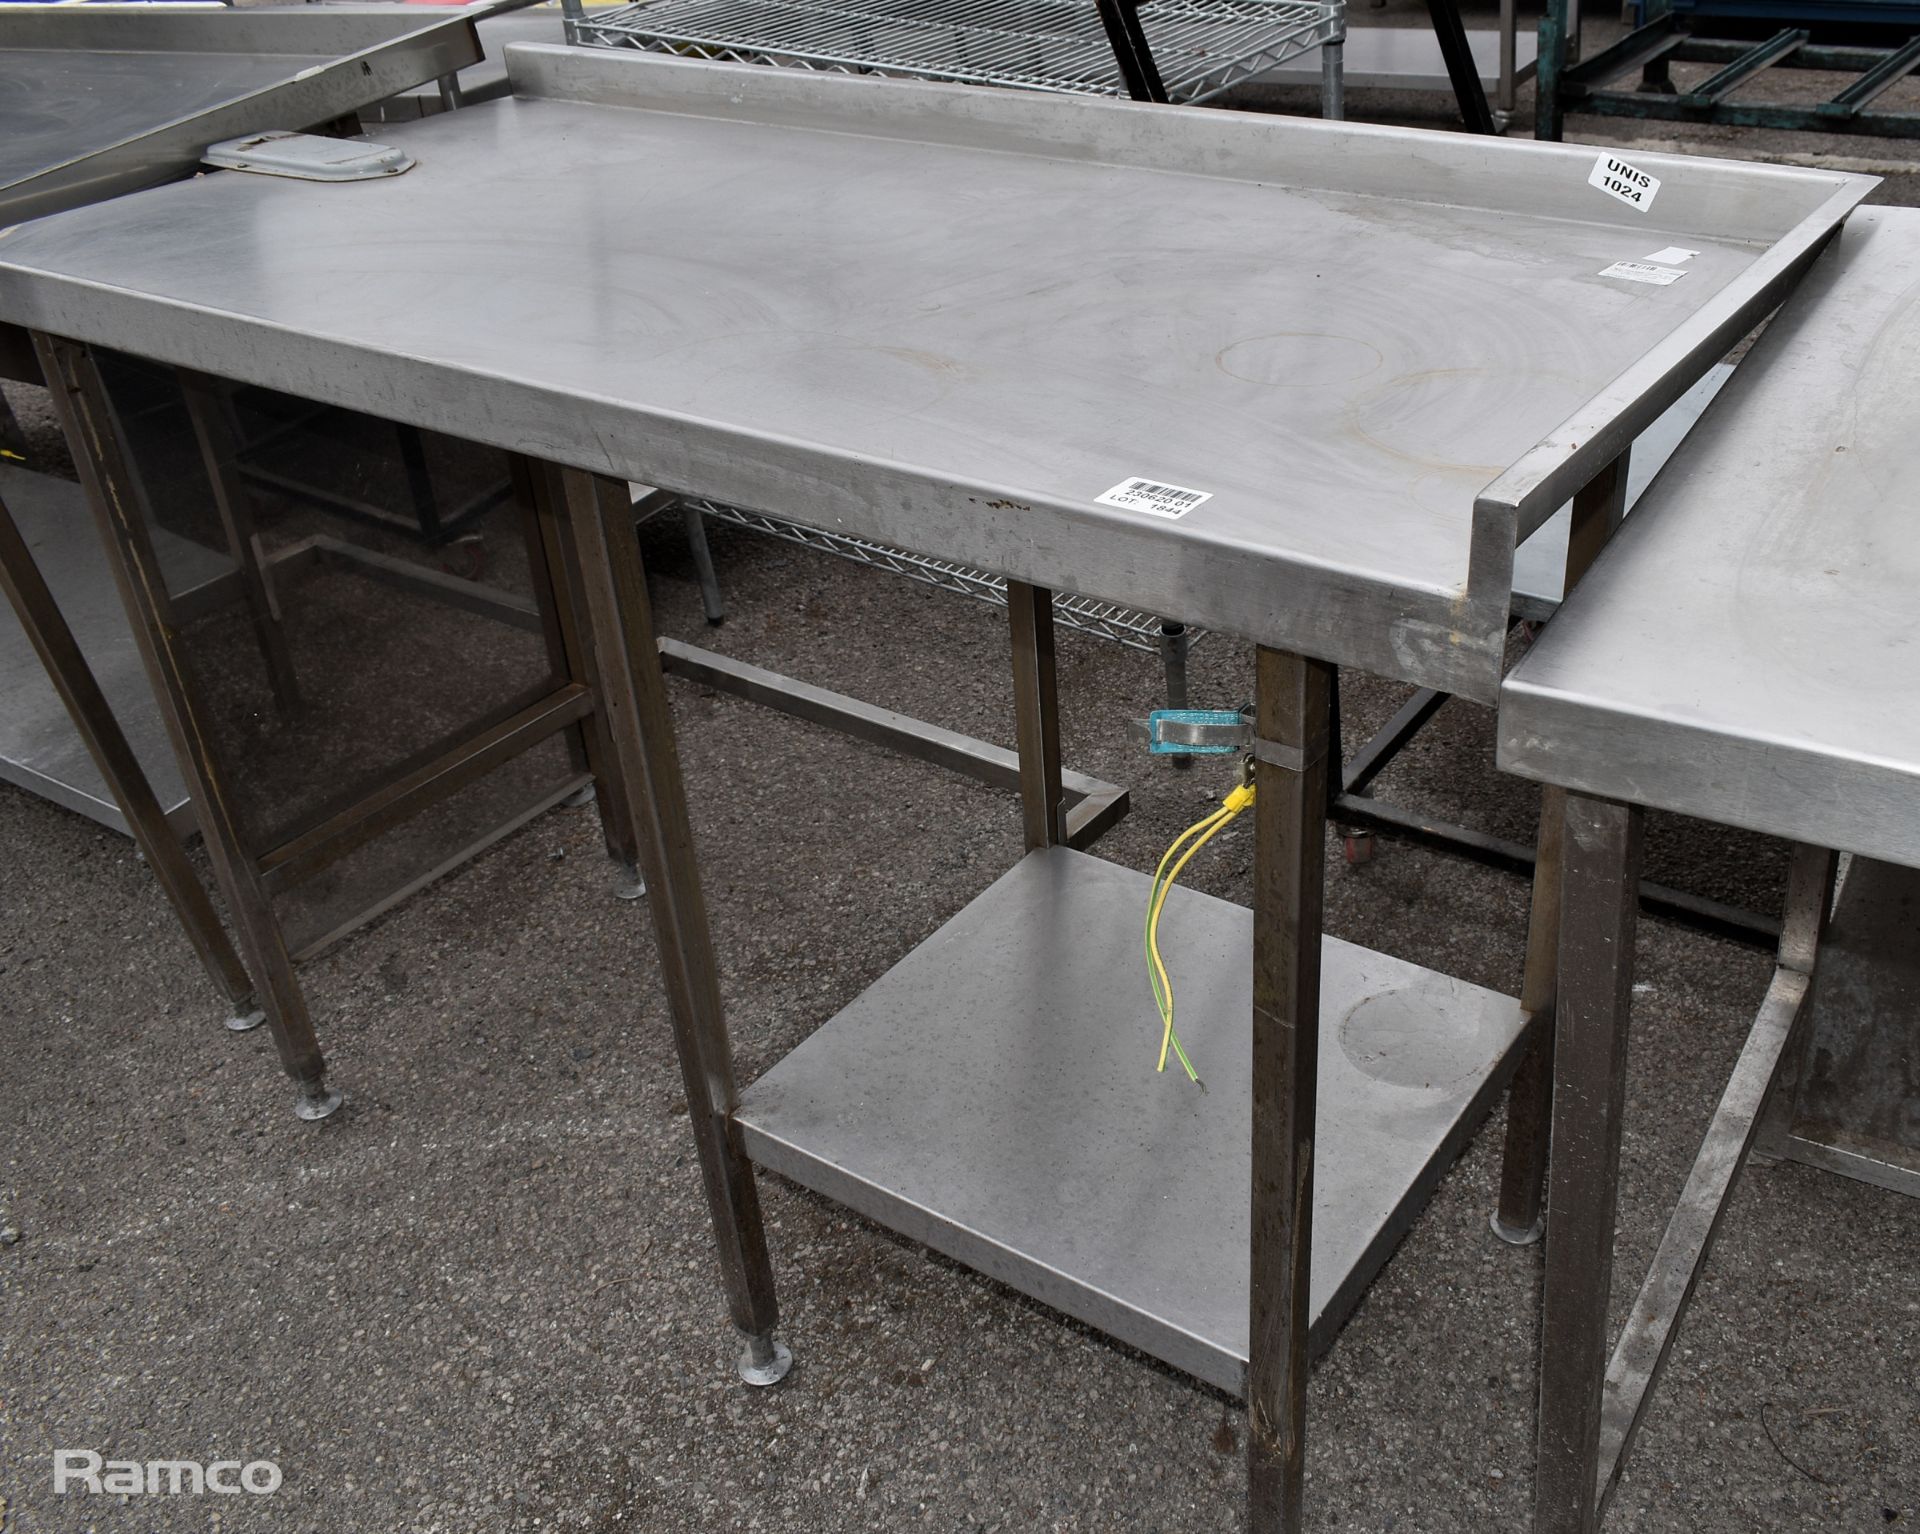 Stainless steel worktop with hol for can opener - W 1400 x D 650 x H 1000mm - Image 2 of 3